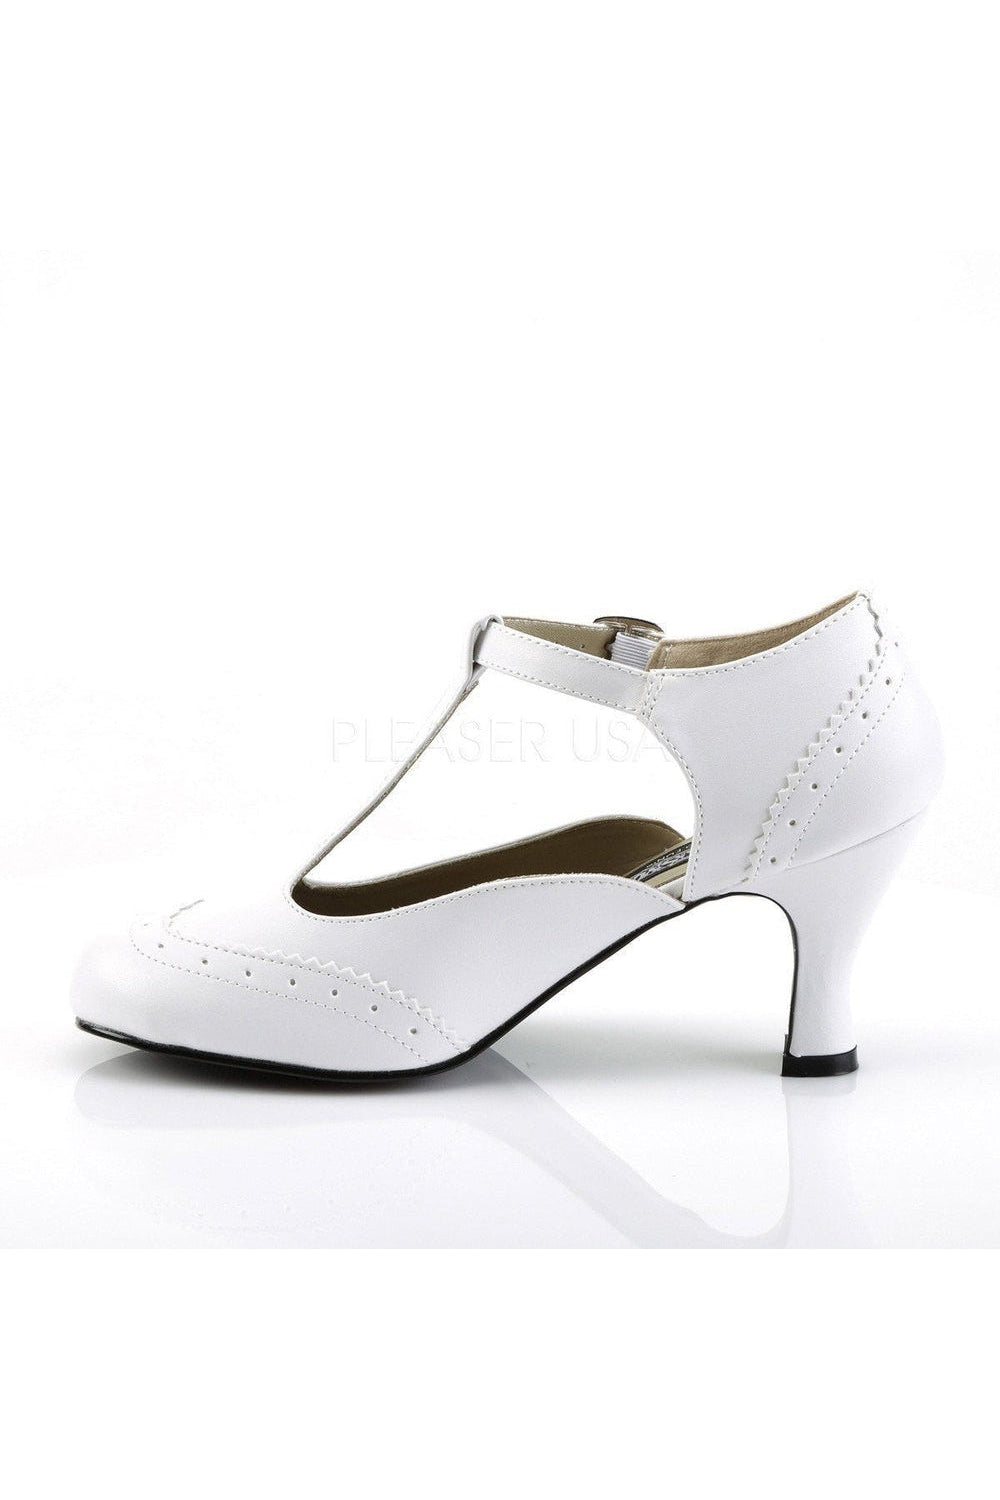 FLAPPER-26 T-Strap | White Faux Leather-Funtasma-Mary Janes-SEXYSHOES.COM